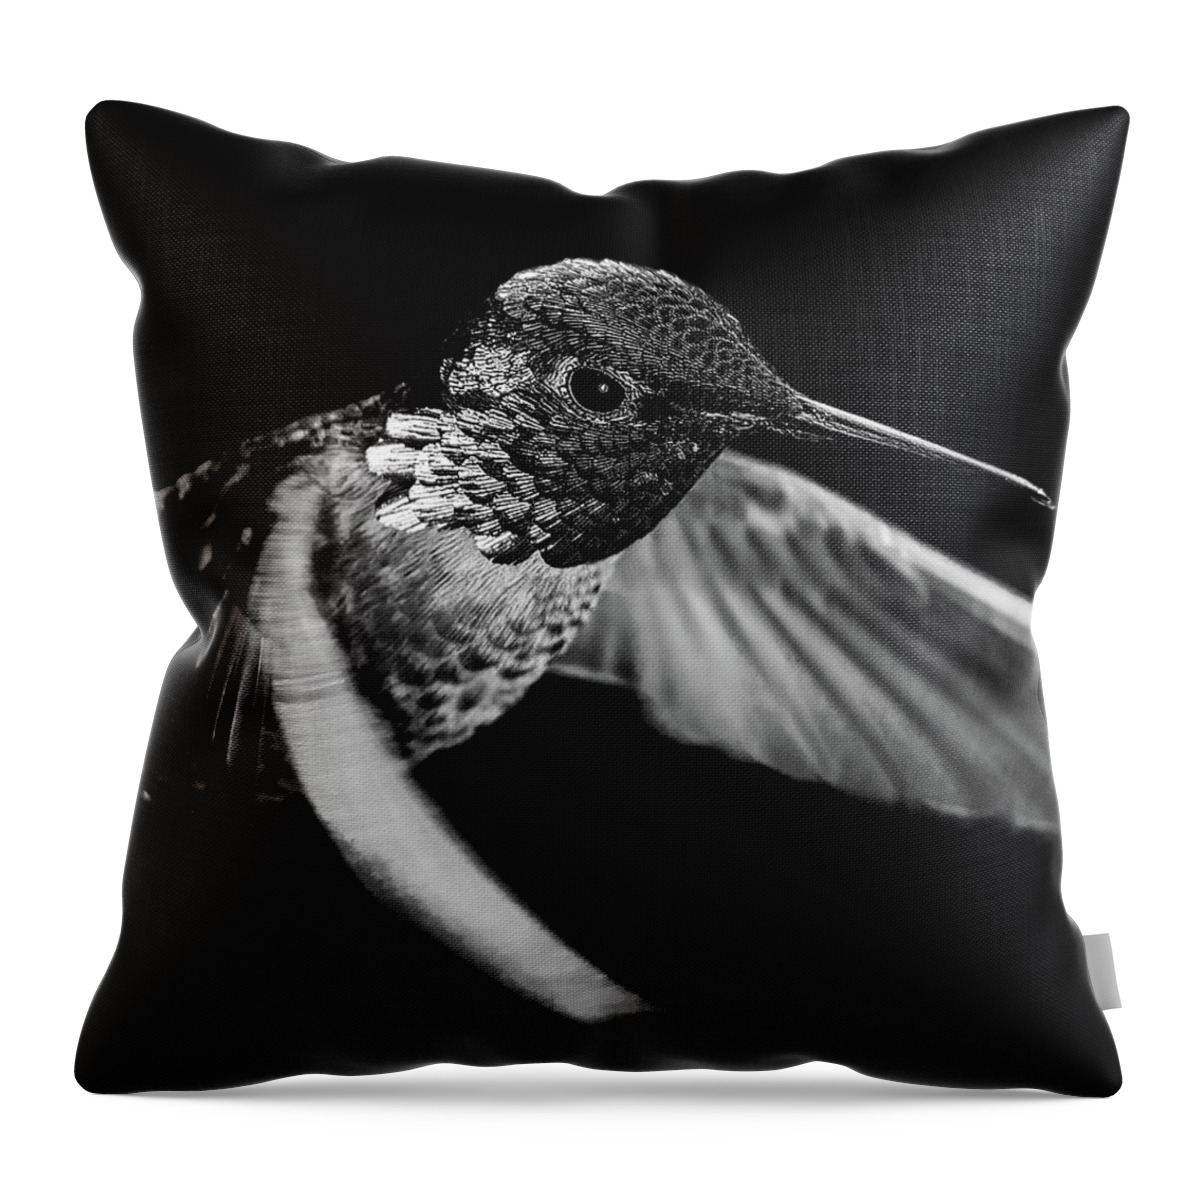 Adult Throw Pillow featuring the photograph The Silver Inquisitor by Briand Sanderson